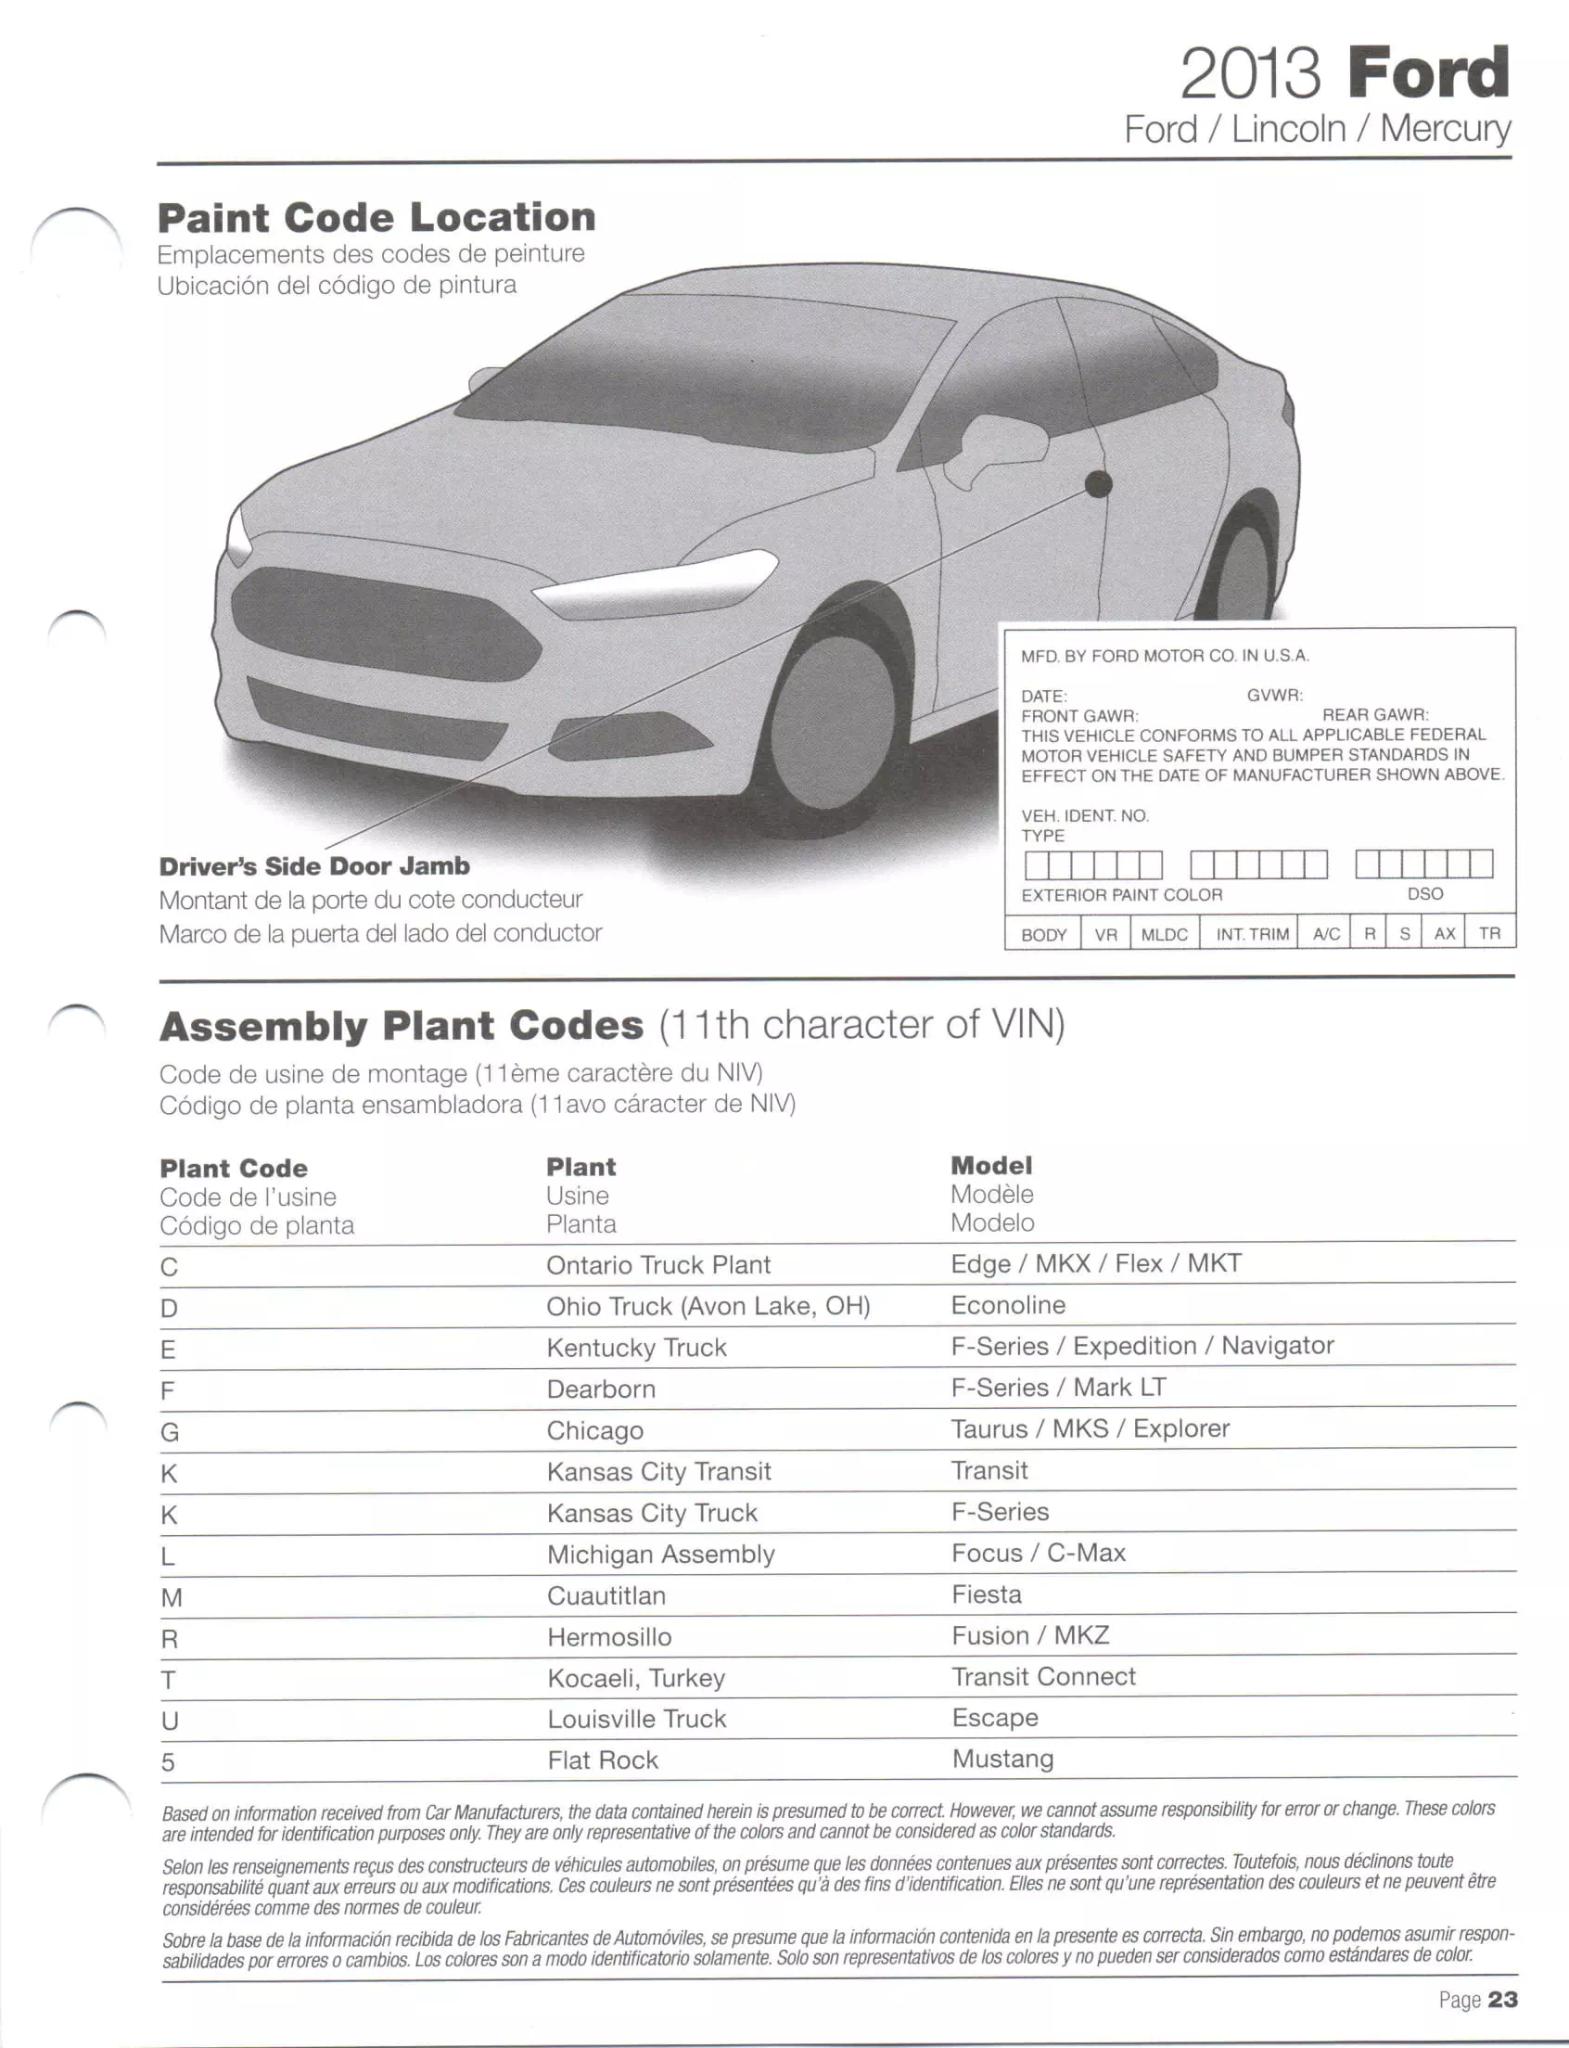 Shows the paint code, and color example for the color used on ford motor company